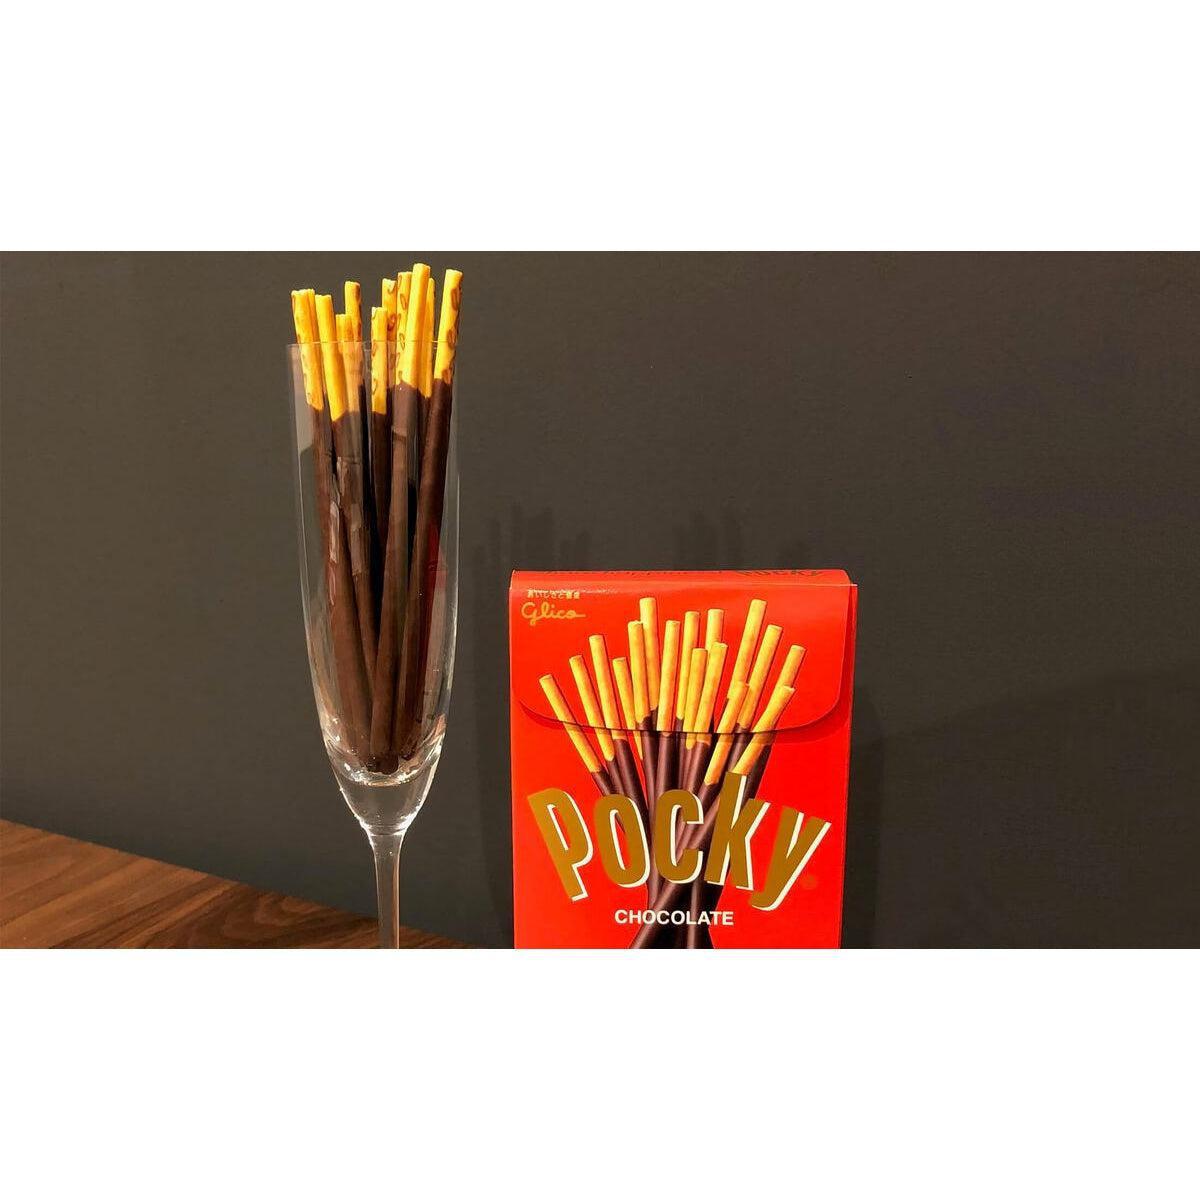 Glico Pocky Chocolate Biscuit Sticks (Pack of 6)